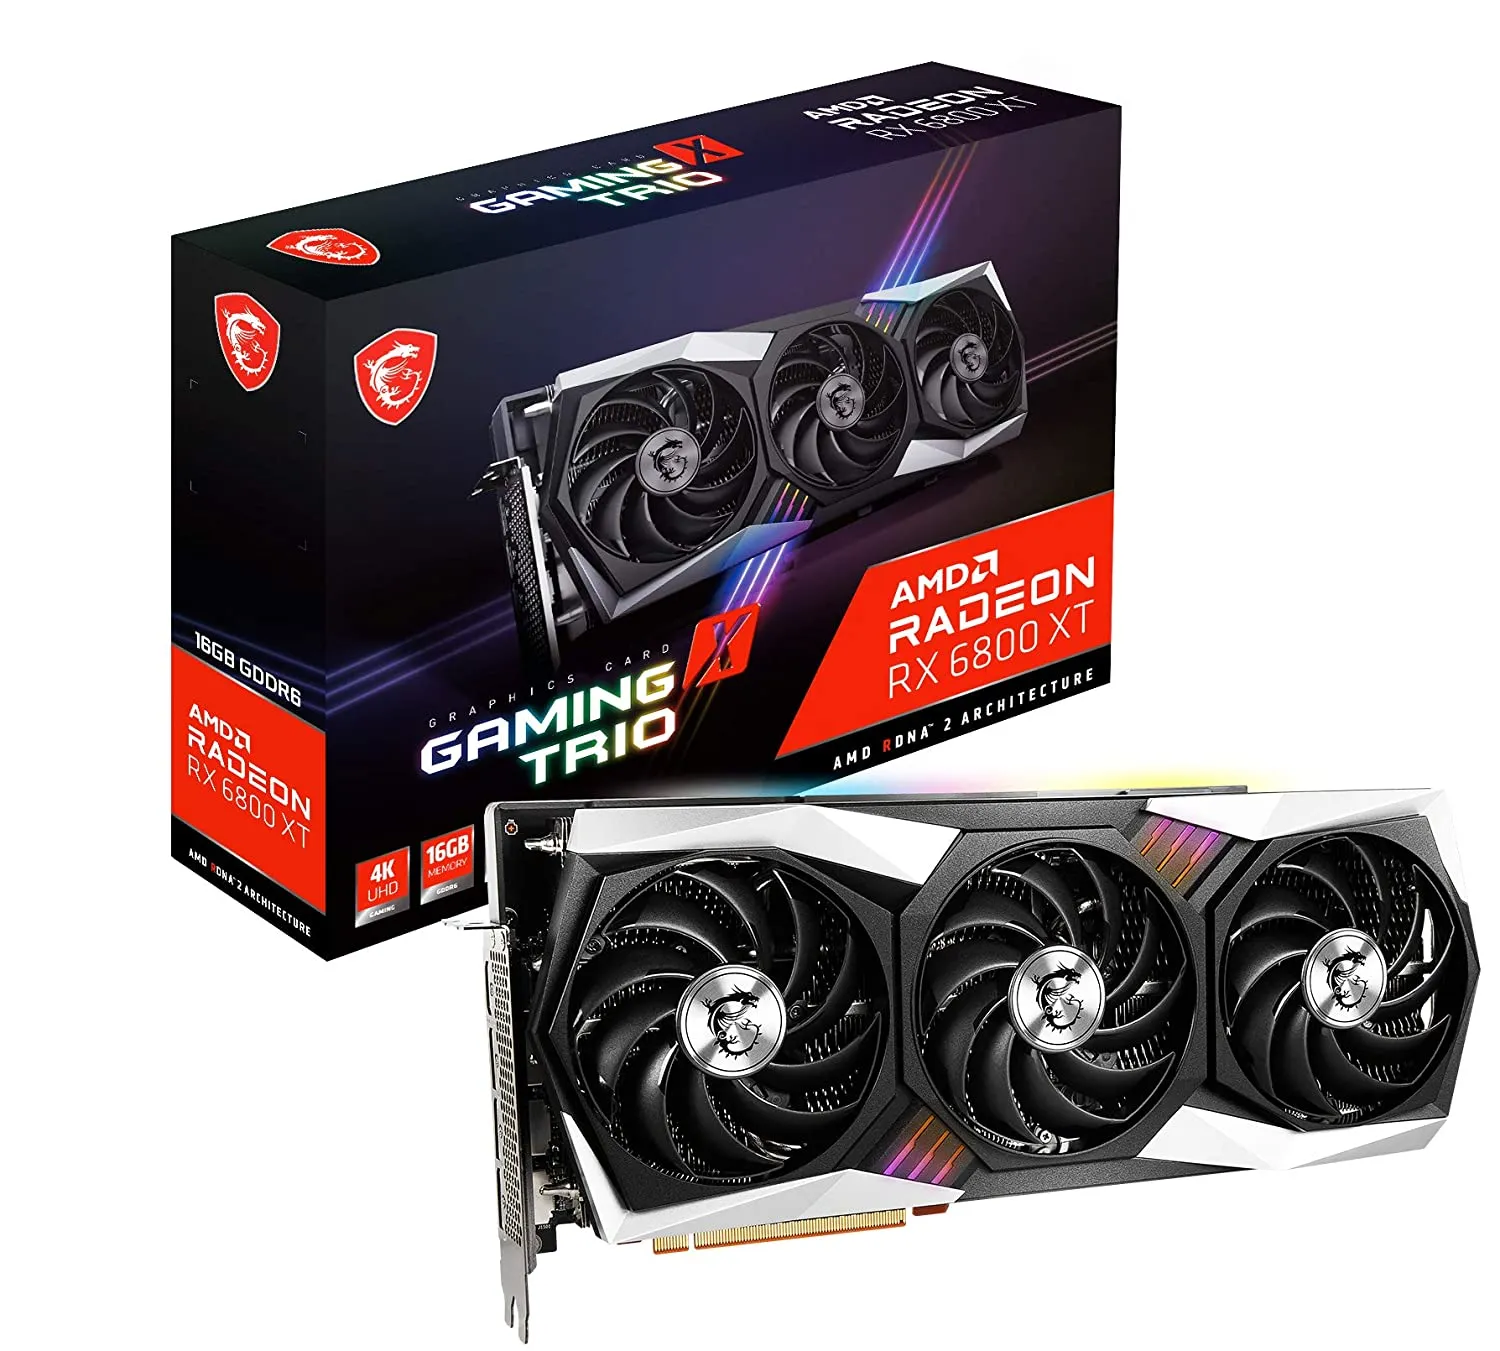 MSI Radeon RX 6800 XT Best Graphics Cards for Gaming PC